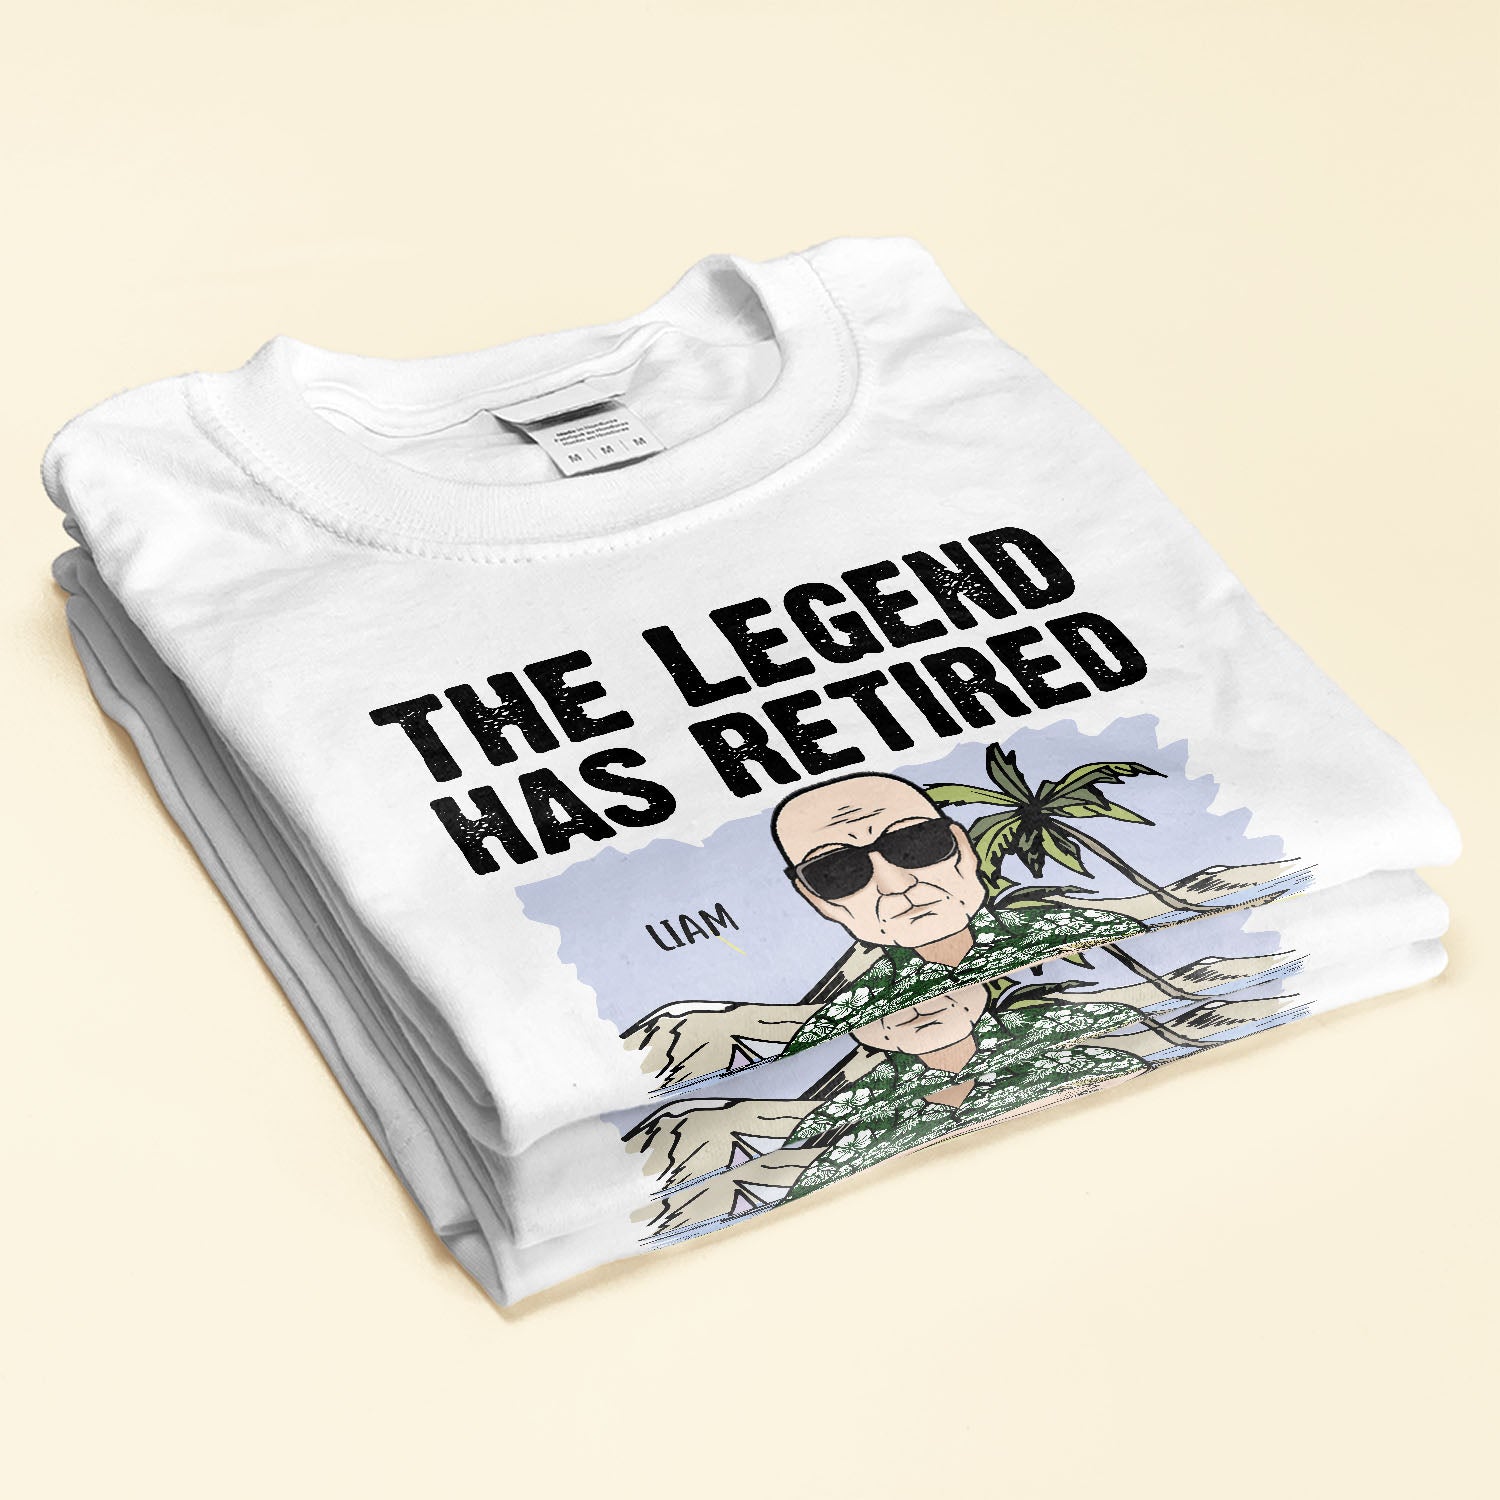 The Legend Has Retired - Not My Problem Anymore - Personalized Shirt